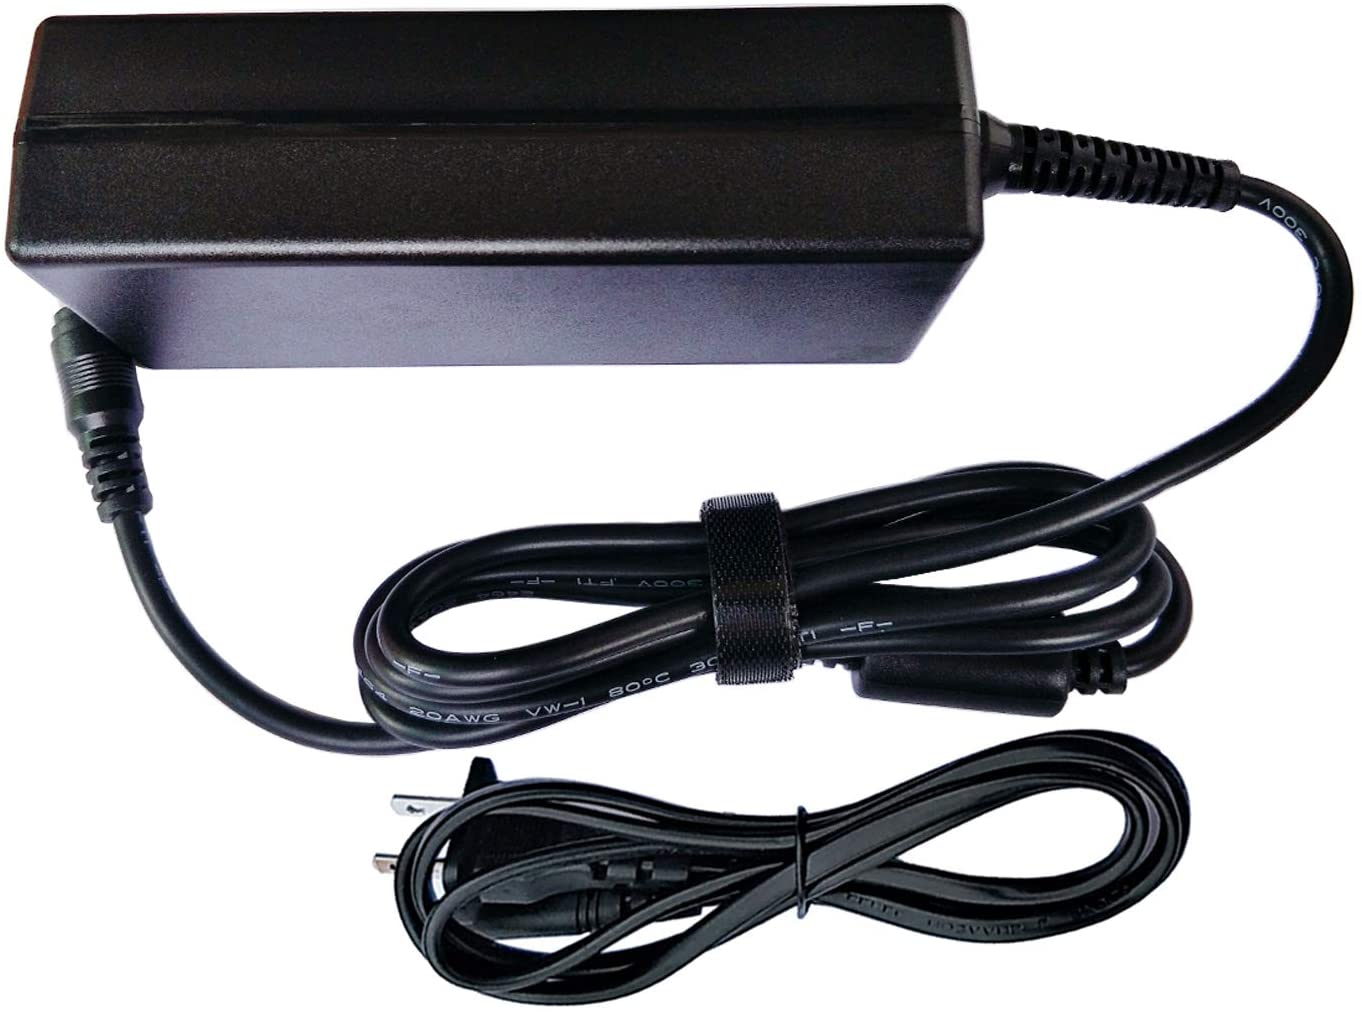 UpBright NEW 16V 2.5A AC/DC Adapter For Fujitsu ScanSnap SV600 FI-SV600 FI-SV600A FI-SV600A-P PA03641-B305 fi-7030 PA03750-B005 PA03750-B001 N7100 PA03706-B205 Scanner, FMC- - image 2 of 5